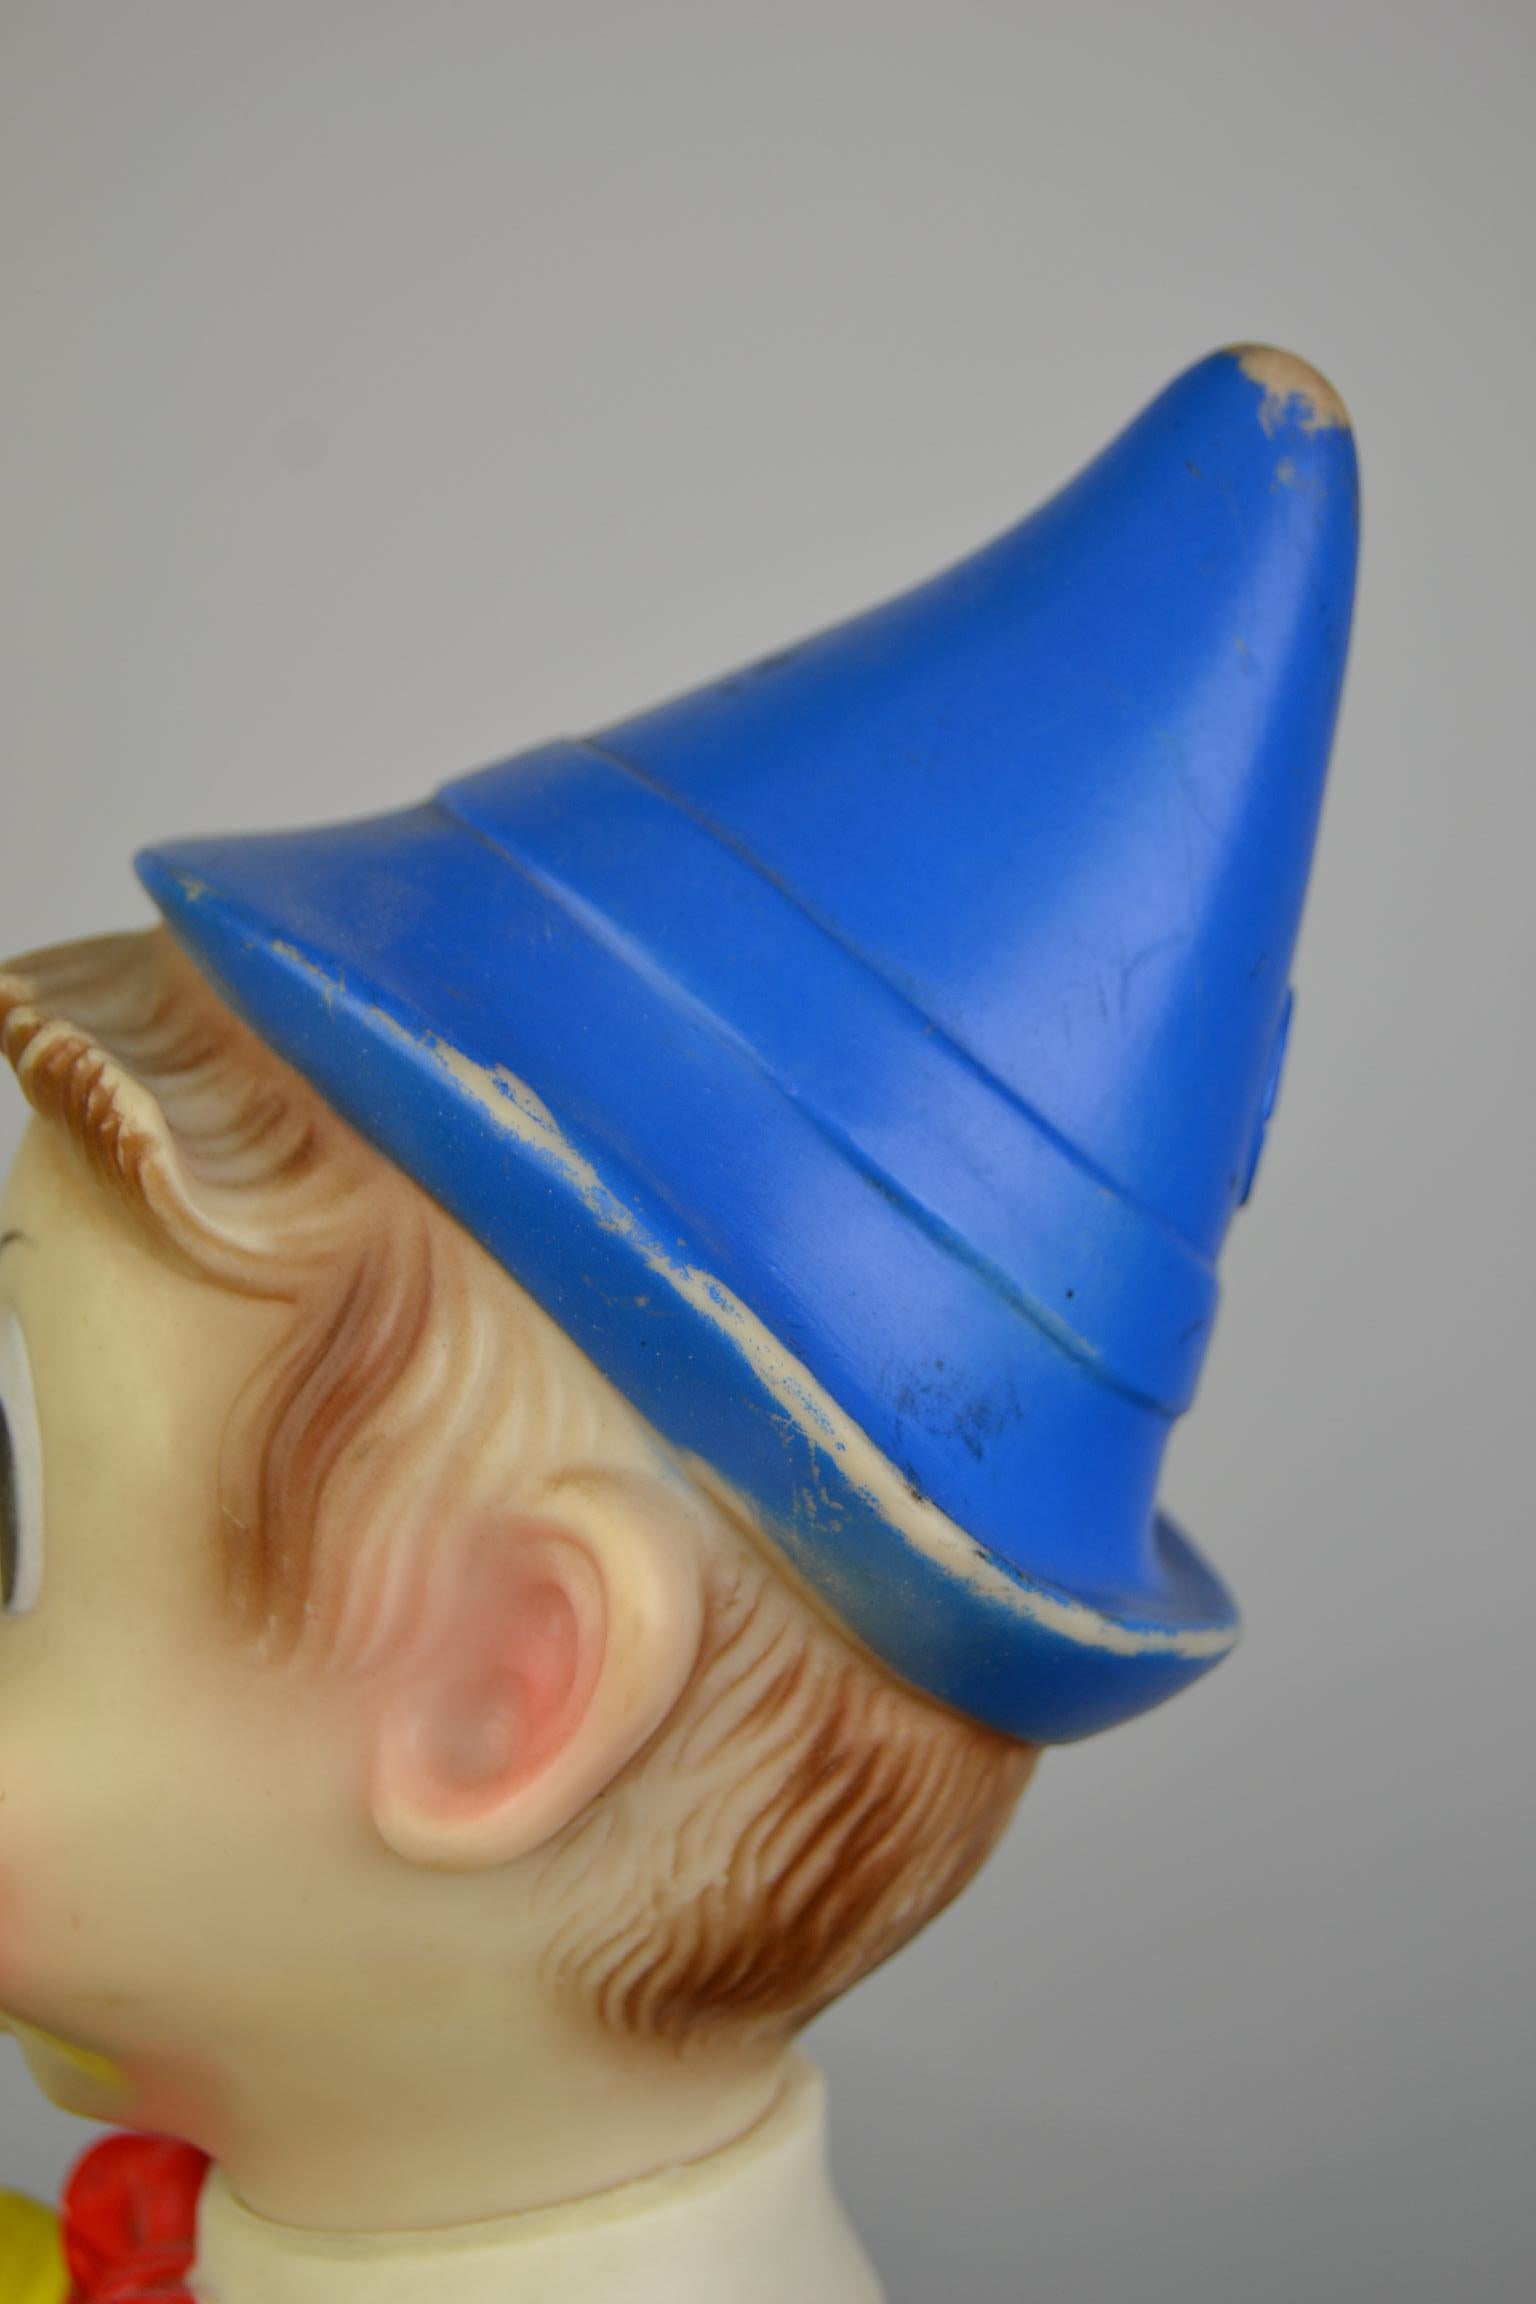 Large Rubber Pinocchio Squeaky Toy by Ledraplastic Italy, 1960s 2